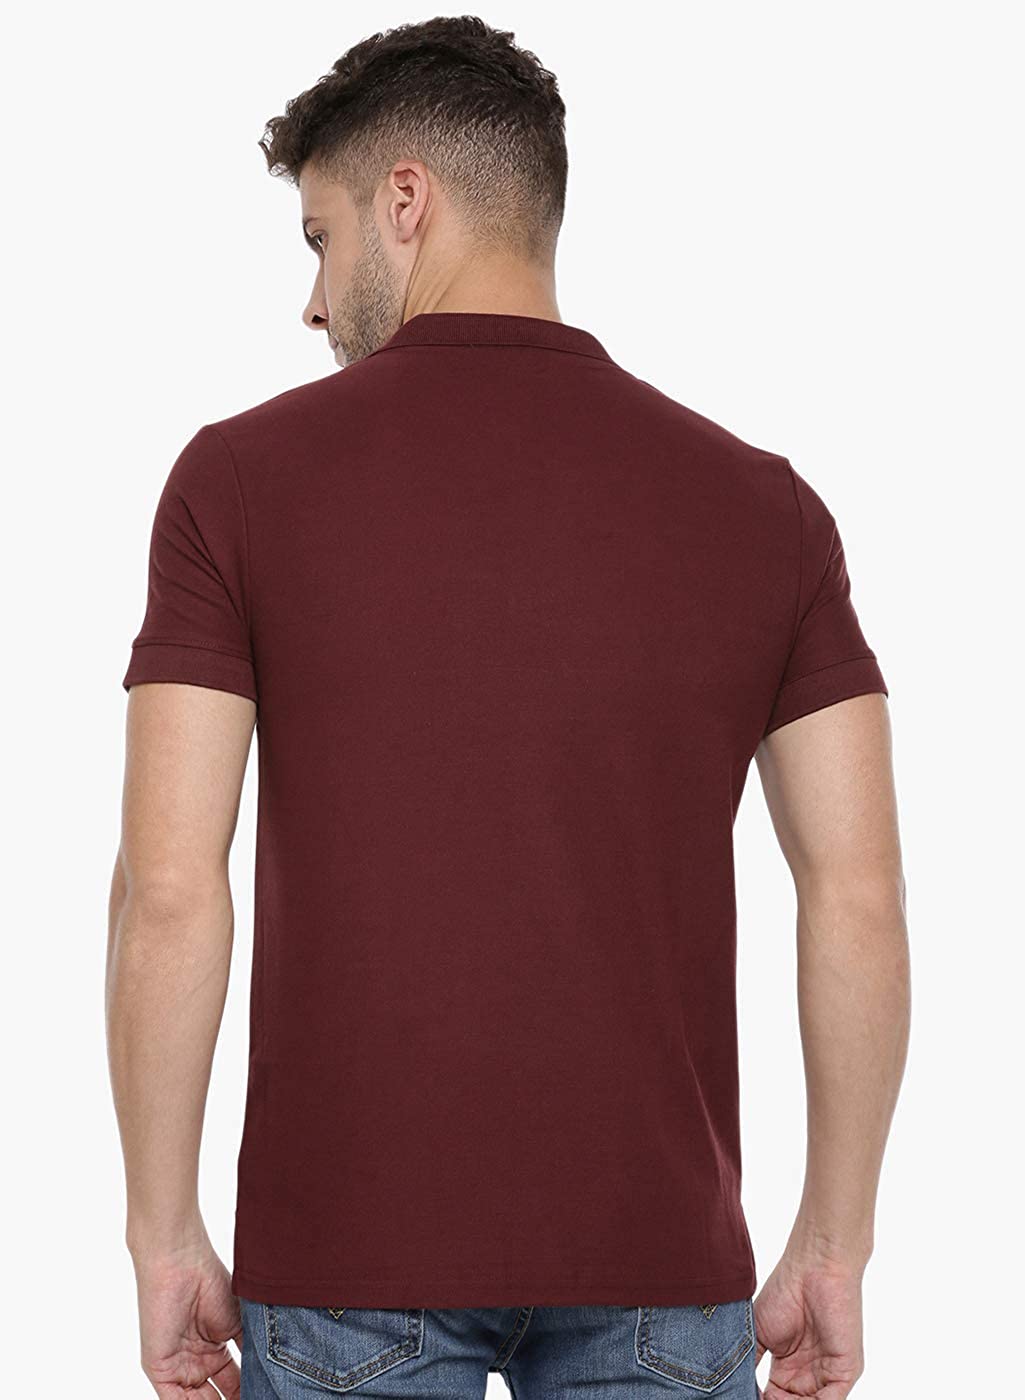 Brown Slim Fit Polo Neck T-Shirt with collar for Men - Stilento